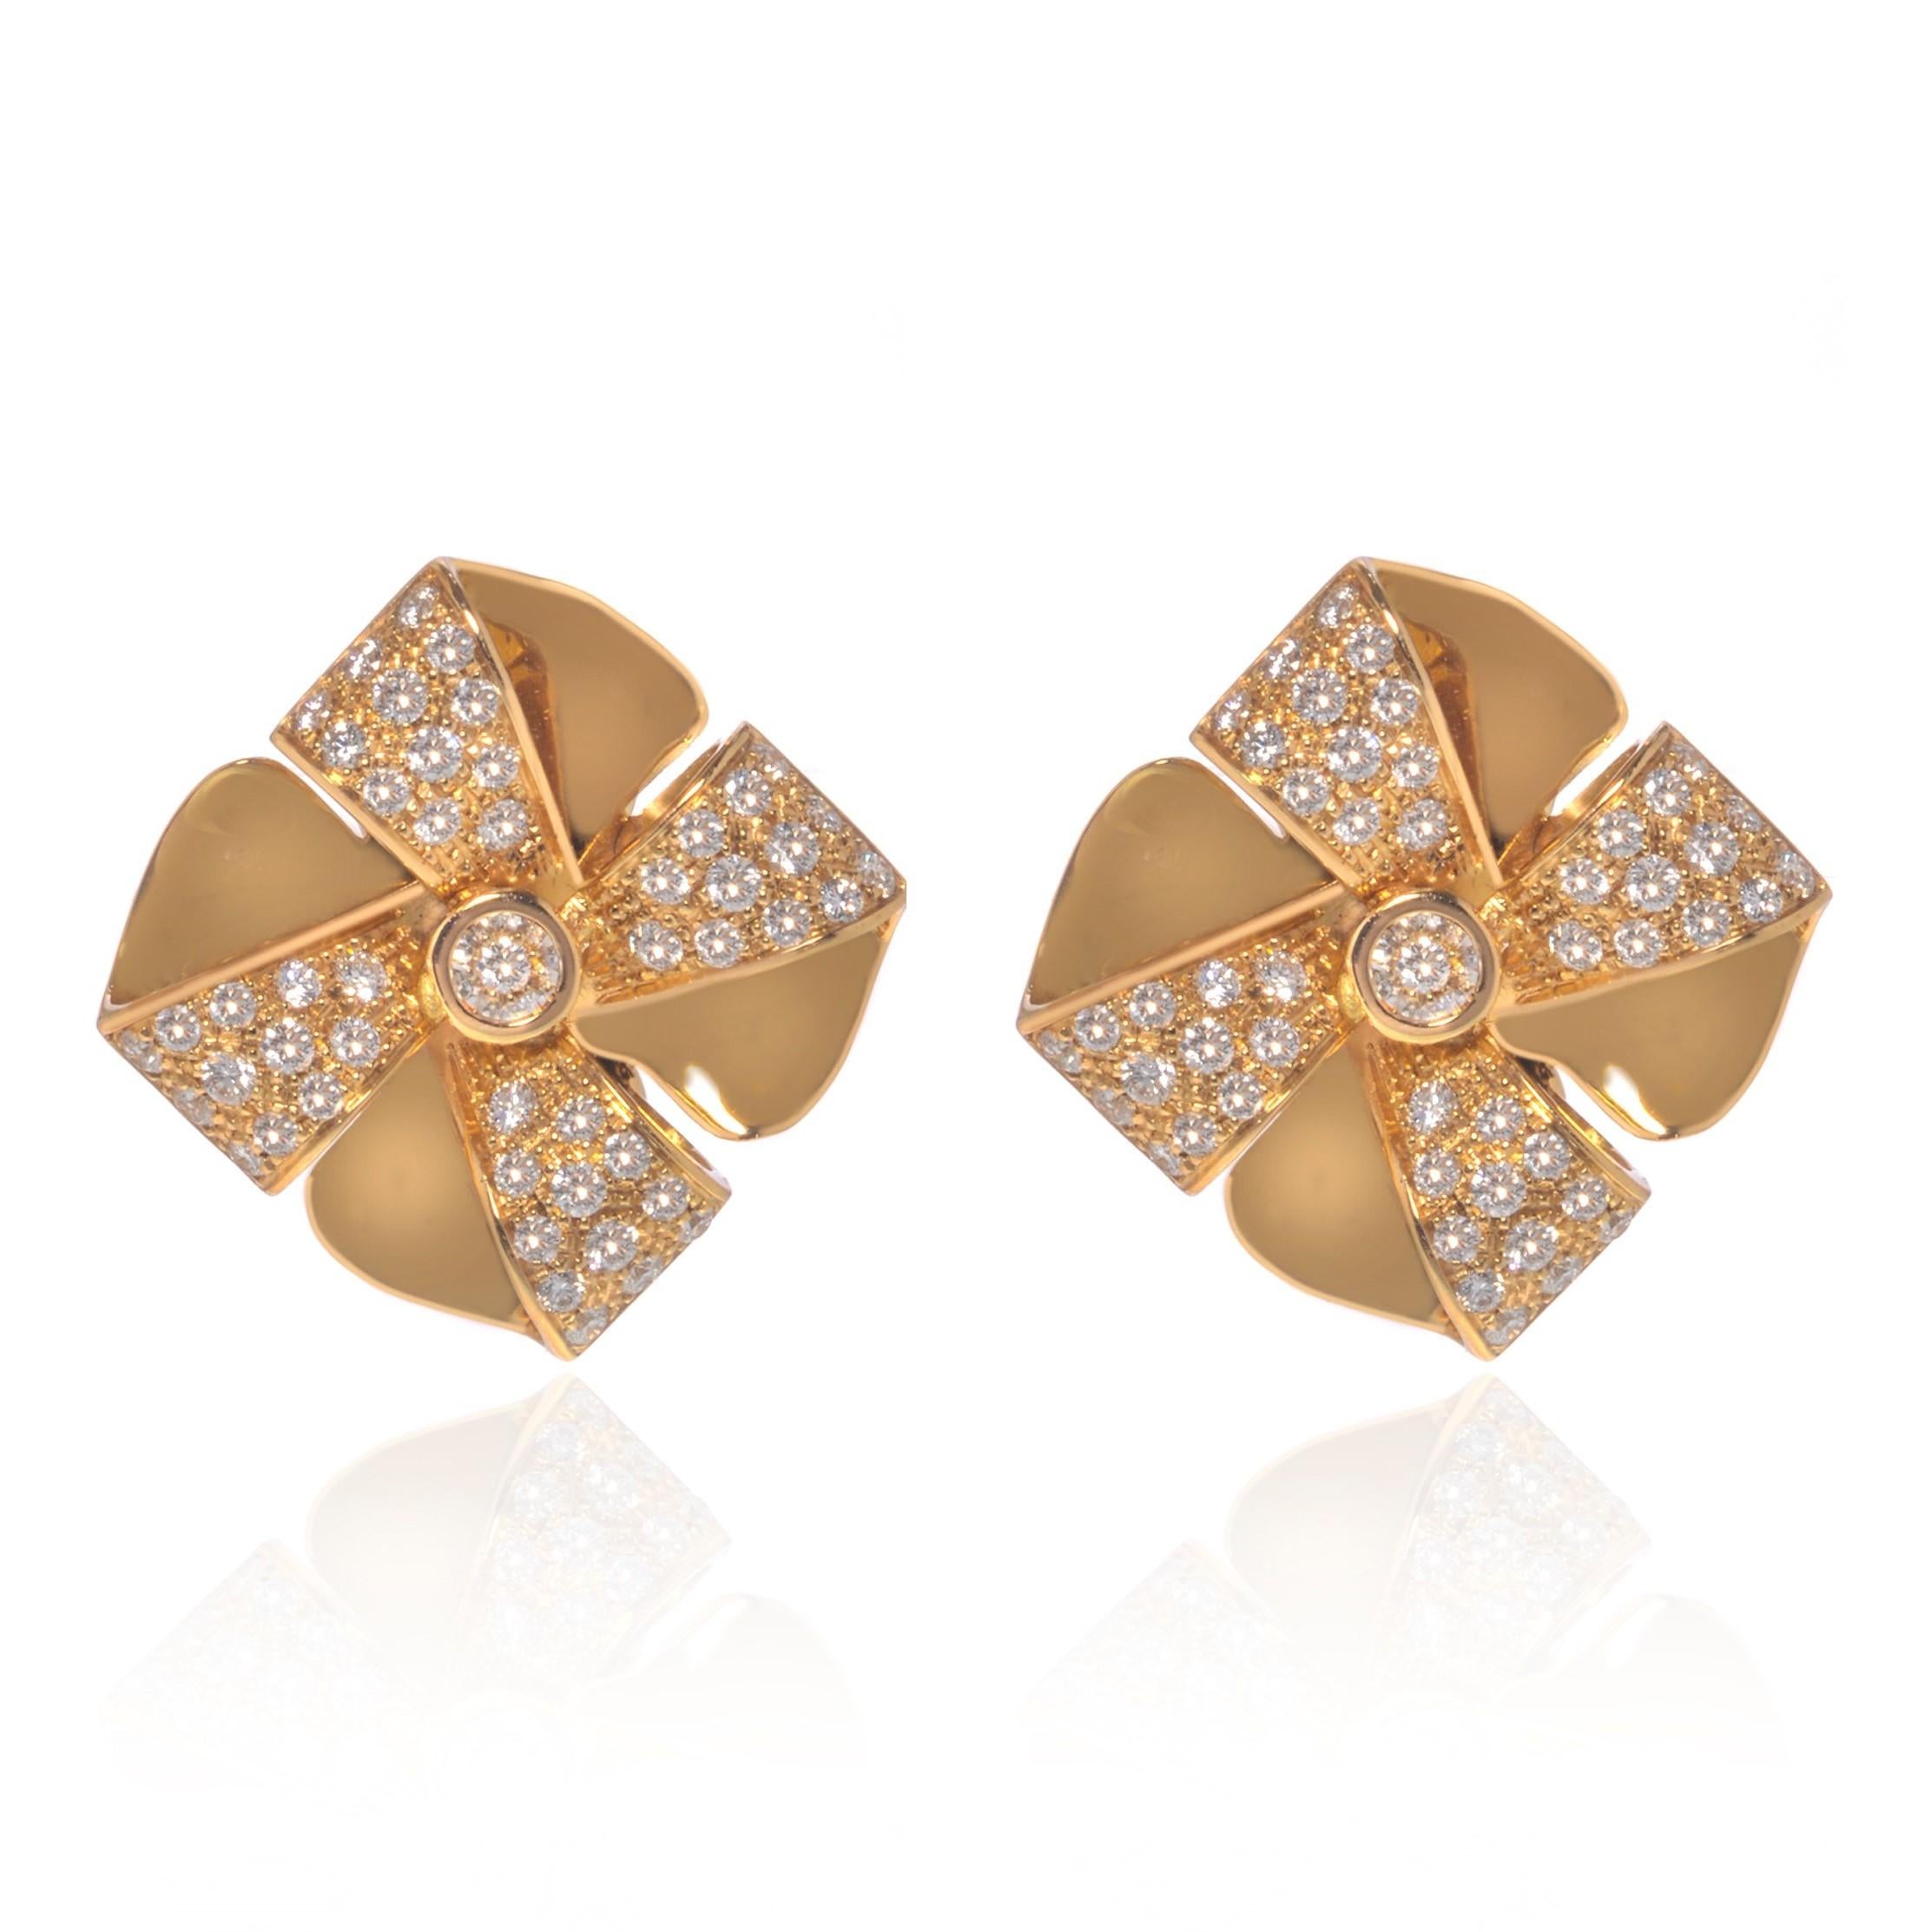 This gorgeous pair of estate earrings is finely crafted in solid 18K yellow gold, made in the shape of beautiful flowers. The total diamond weight for the pair is 0.99 carats of VVS clarity and G color. Each earring measures 20mm. The earrings are